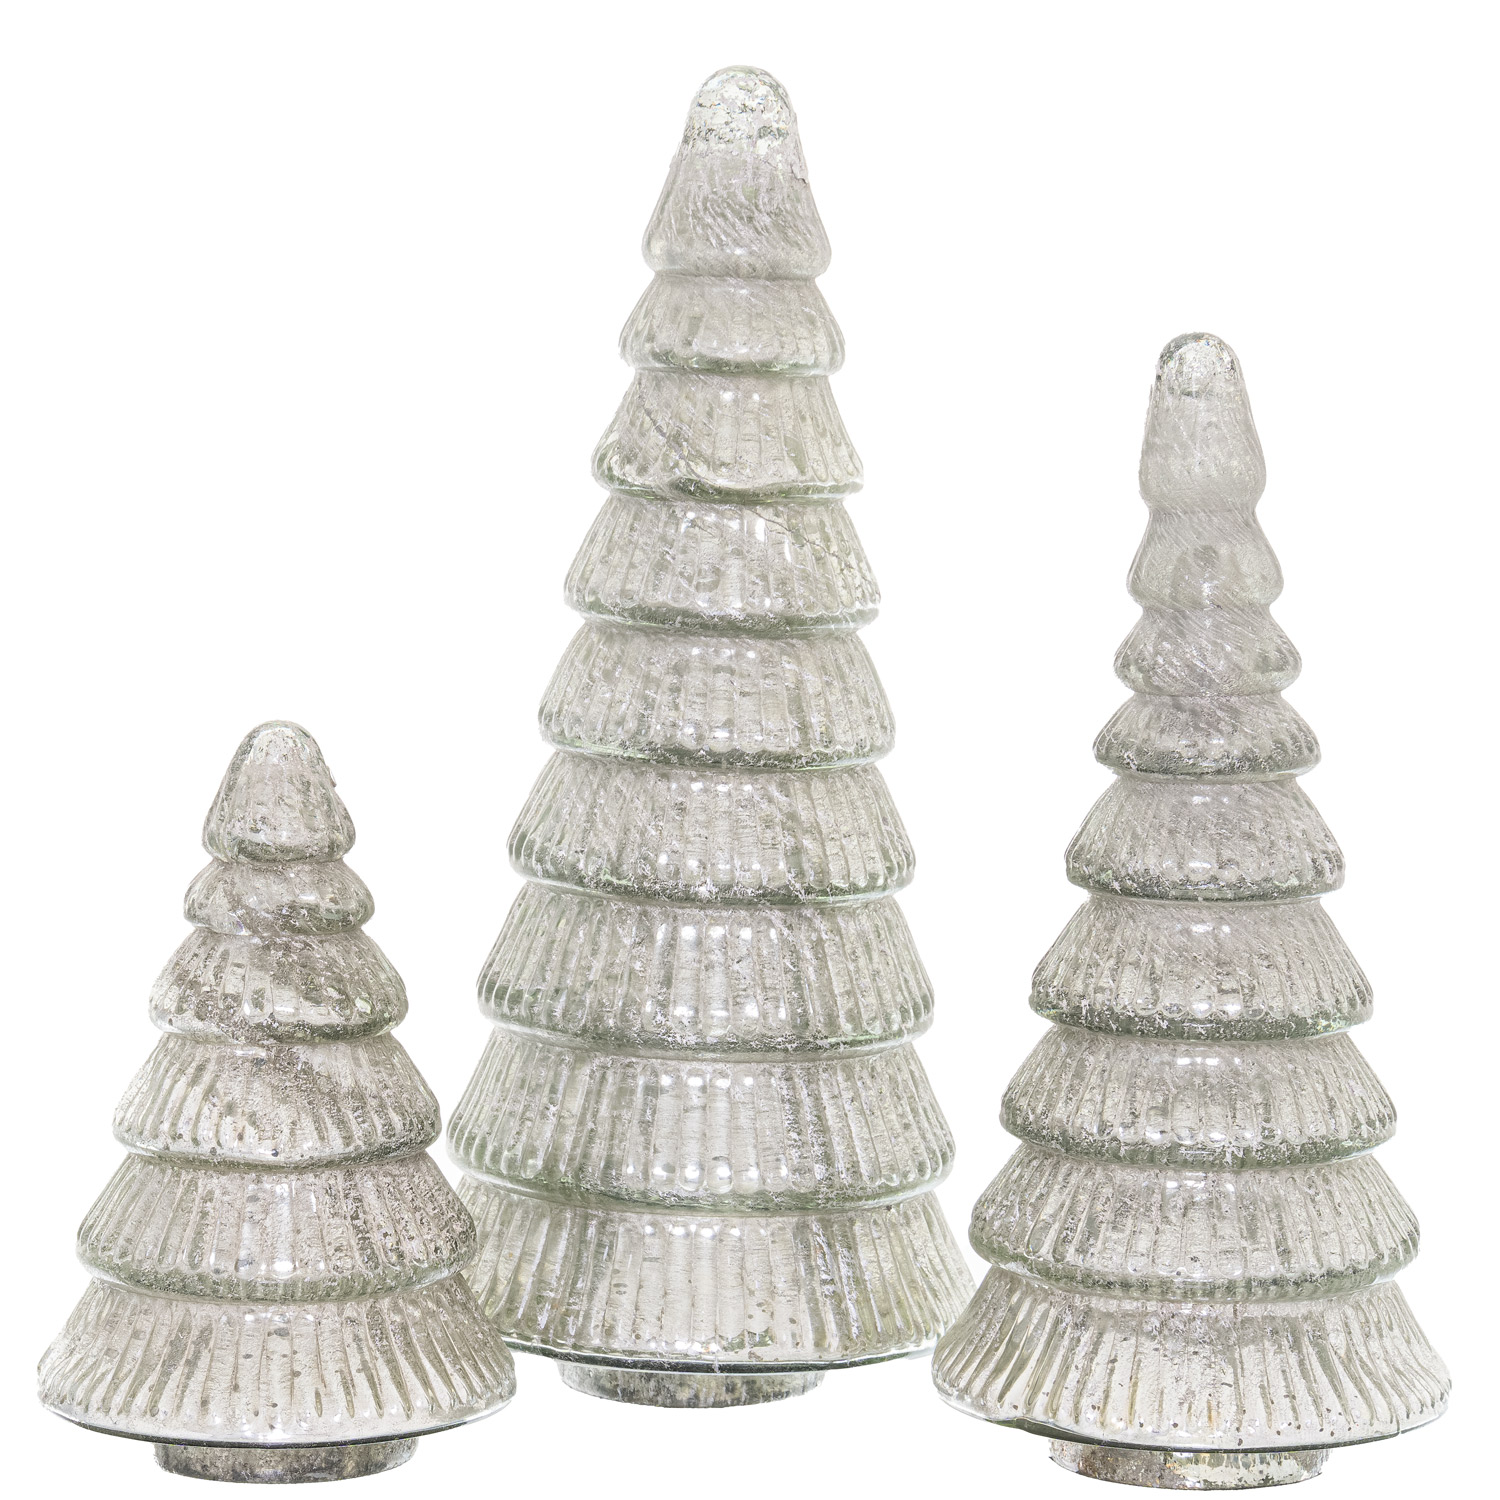 The Noel Collection Tiered Decorative Medium Glass Tree - Image 2